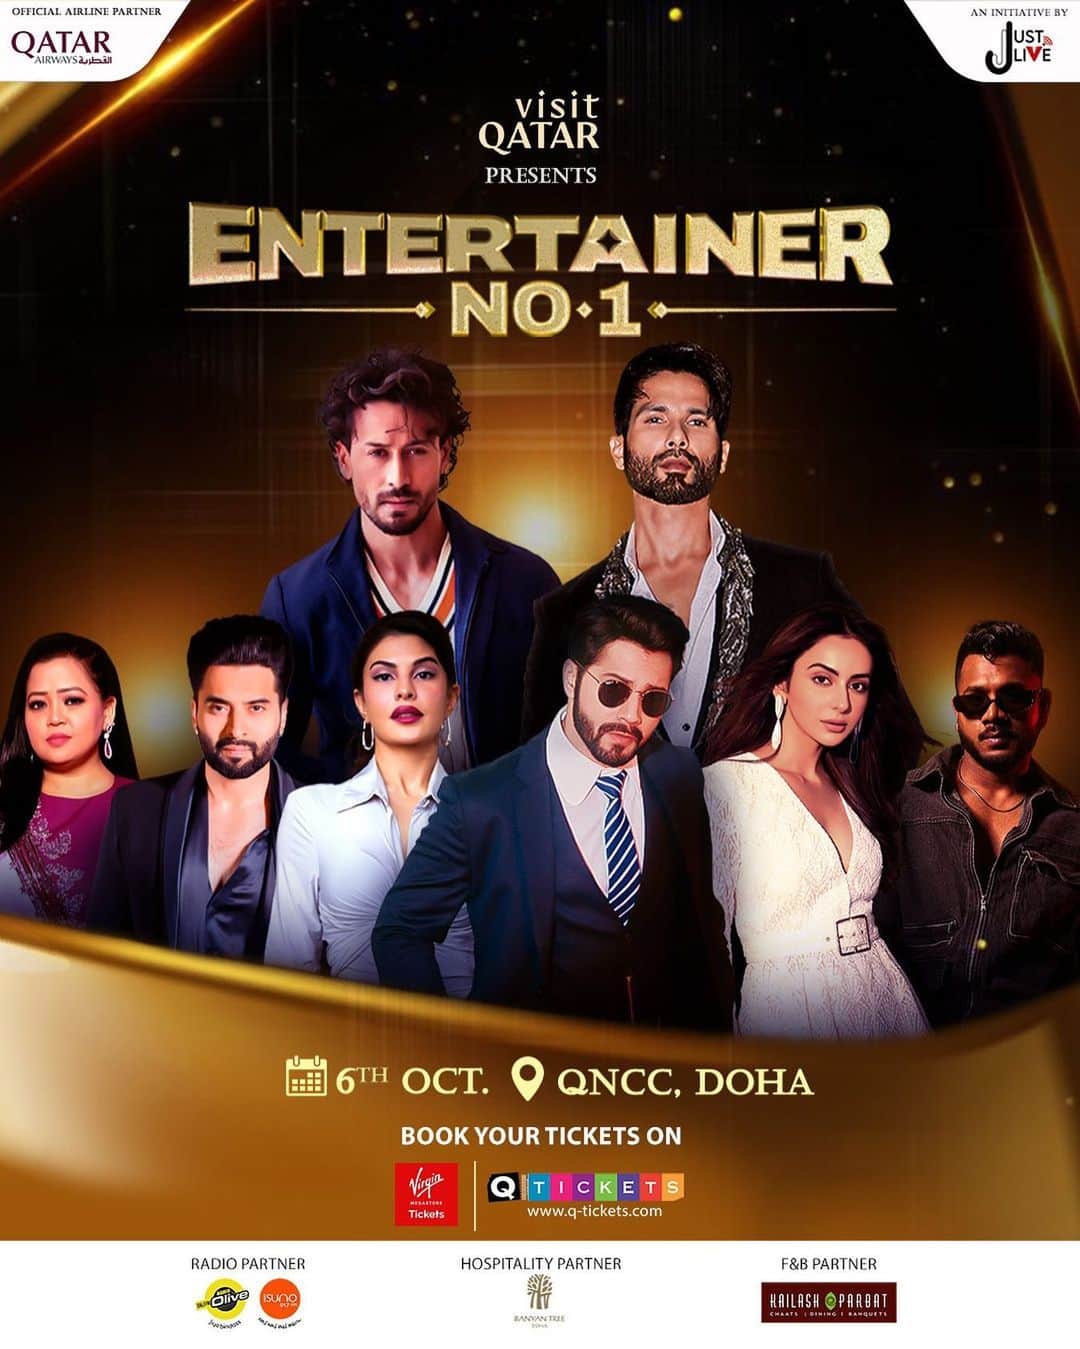 Varun Dhawanのインスタグラム：「I’m coming to doha with my friends to entertain you for night full of Jashn #EntertainerNo1 🌟🌠   Get ready for a night of pure Bollywood entertainment like never before exclusively at @visitqatar presents #EntertainerNo1, brought to you by @jjustliveofficial 💫 on 6th October at QNCC, Doha.    Grab your tickets NOW! (Link IN BIO)  @qatarairways @radioolive.qa @virginmegastoretickets @qtickets_qtr @qatarcalendar @radiosuno @jackkybhagnani @shyamc26 : #JjustLive#EntertainerNo1#Qatar#Doha#BollywoodNight #BollywoodMagic#QatarEvent2023#FirstTimeInQatar」